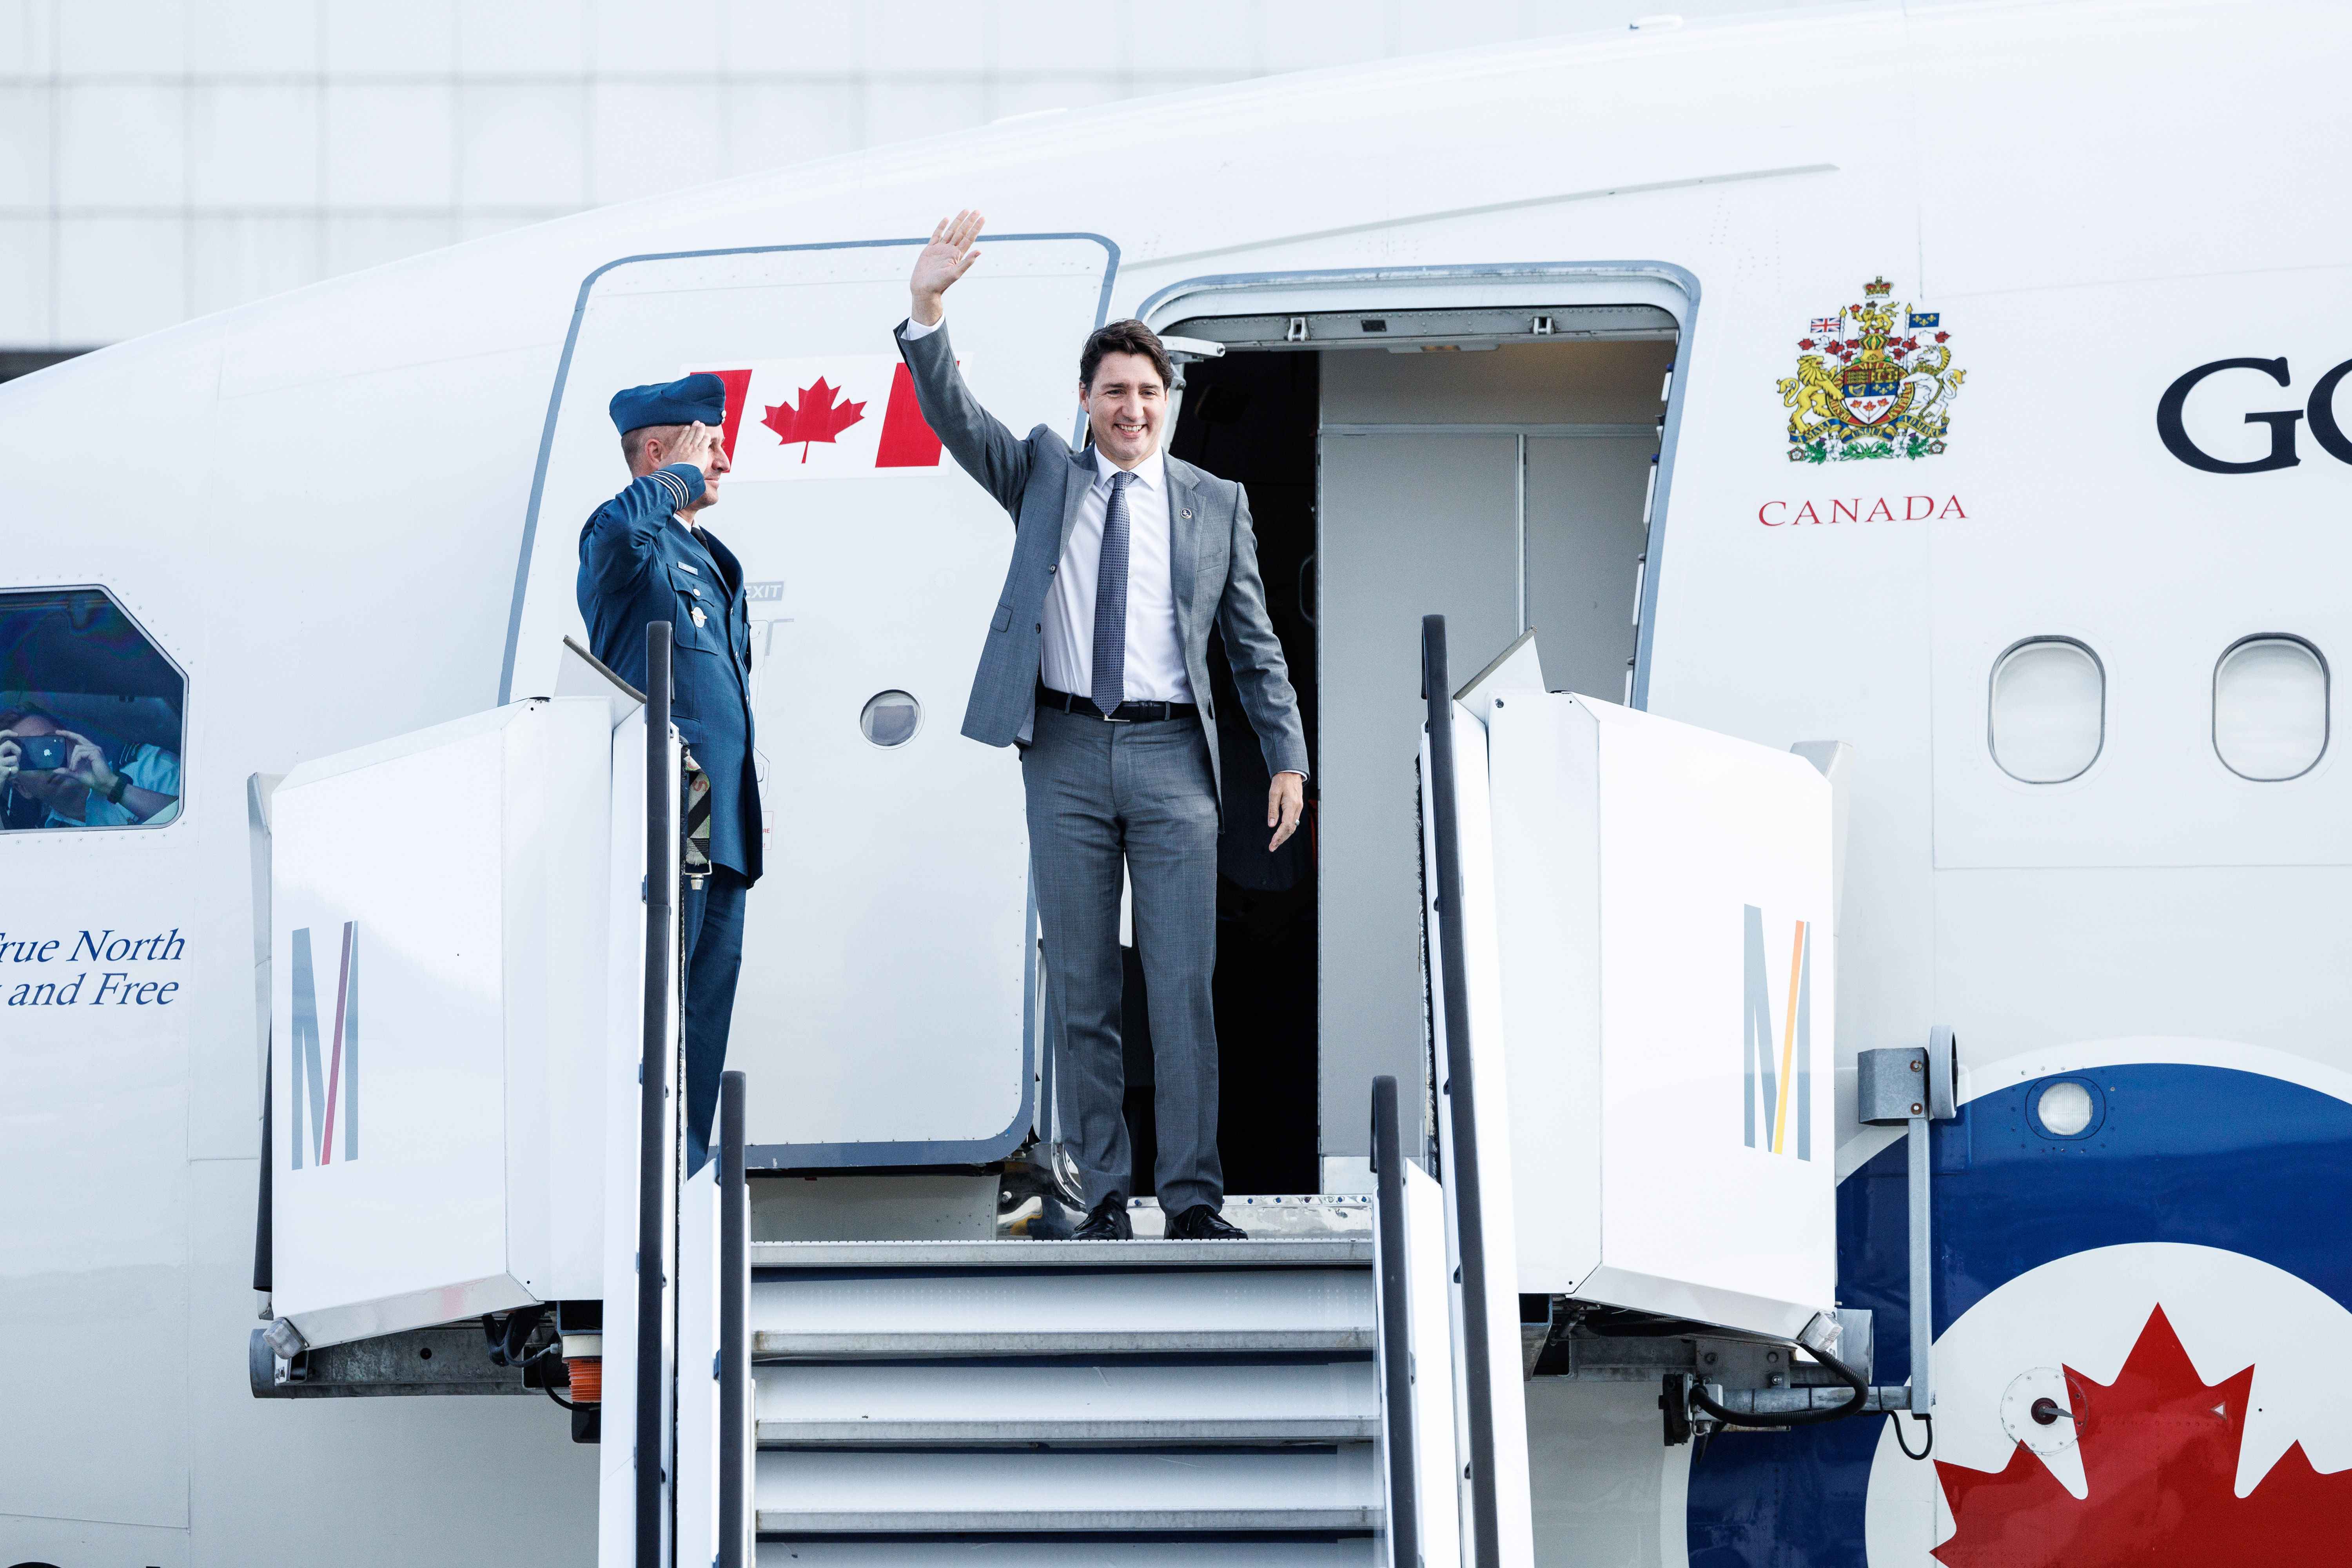 Justin Trudeau (Prime Minister of Canada) waving on arrival at Munich Airport.